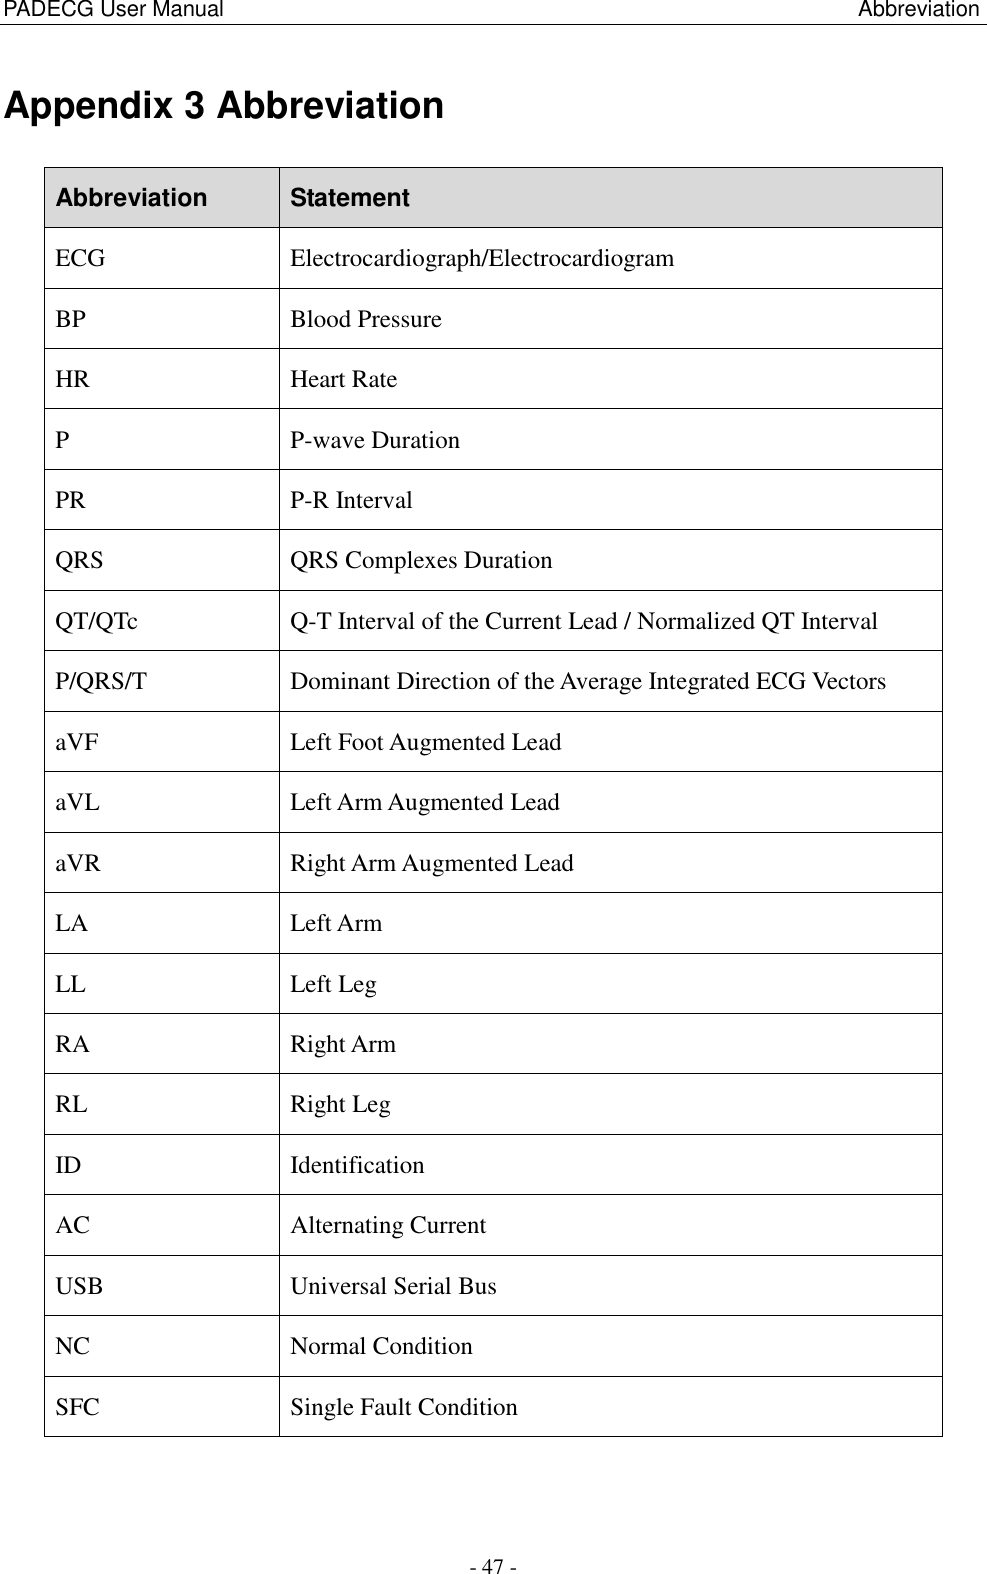 PADECG User Manual                                                          Abbreviation - 47 - Appendix 3 Abbreviation Abbreviation Statement ECG Electrocardiograph/Electrocardiogram BP Blood Pressure HR Heart Rate P P-wave Duration PR P-R Interval QRS QRS Complexes Duration QT/QTc Q-T Interval of the Current Lead / Normalized QT Interval P/QRS/T Dominant Direction of the Average Integrated ECG Vectors aVF Left Foot Augmented Lead aVL Left Arm Augmented Lead aVR Right Arm Augmented Lead LA Left Arm LL Left Leg RA Right Arm RL Right Leg ID Identification AC Alternating Current USB Universal Serial Bus NC Normal Condition SFC Single Fault Condition  